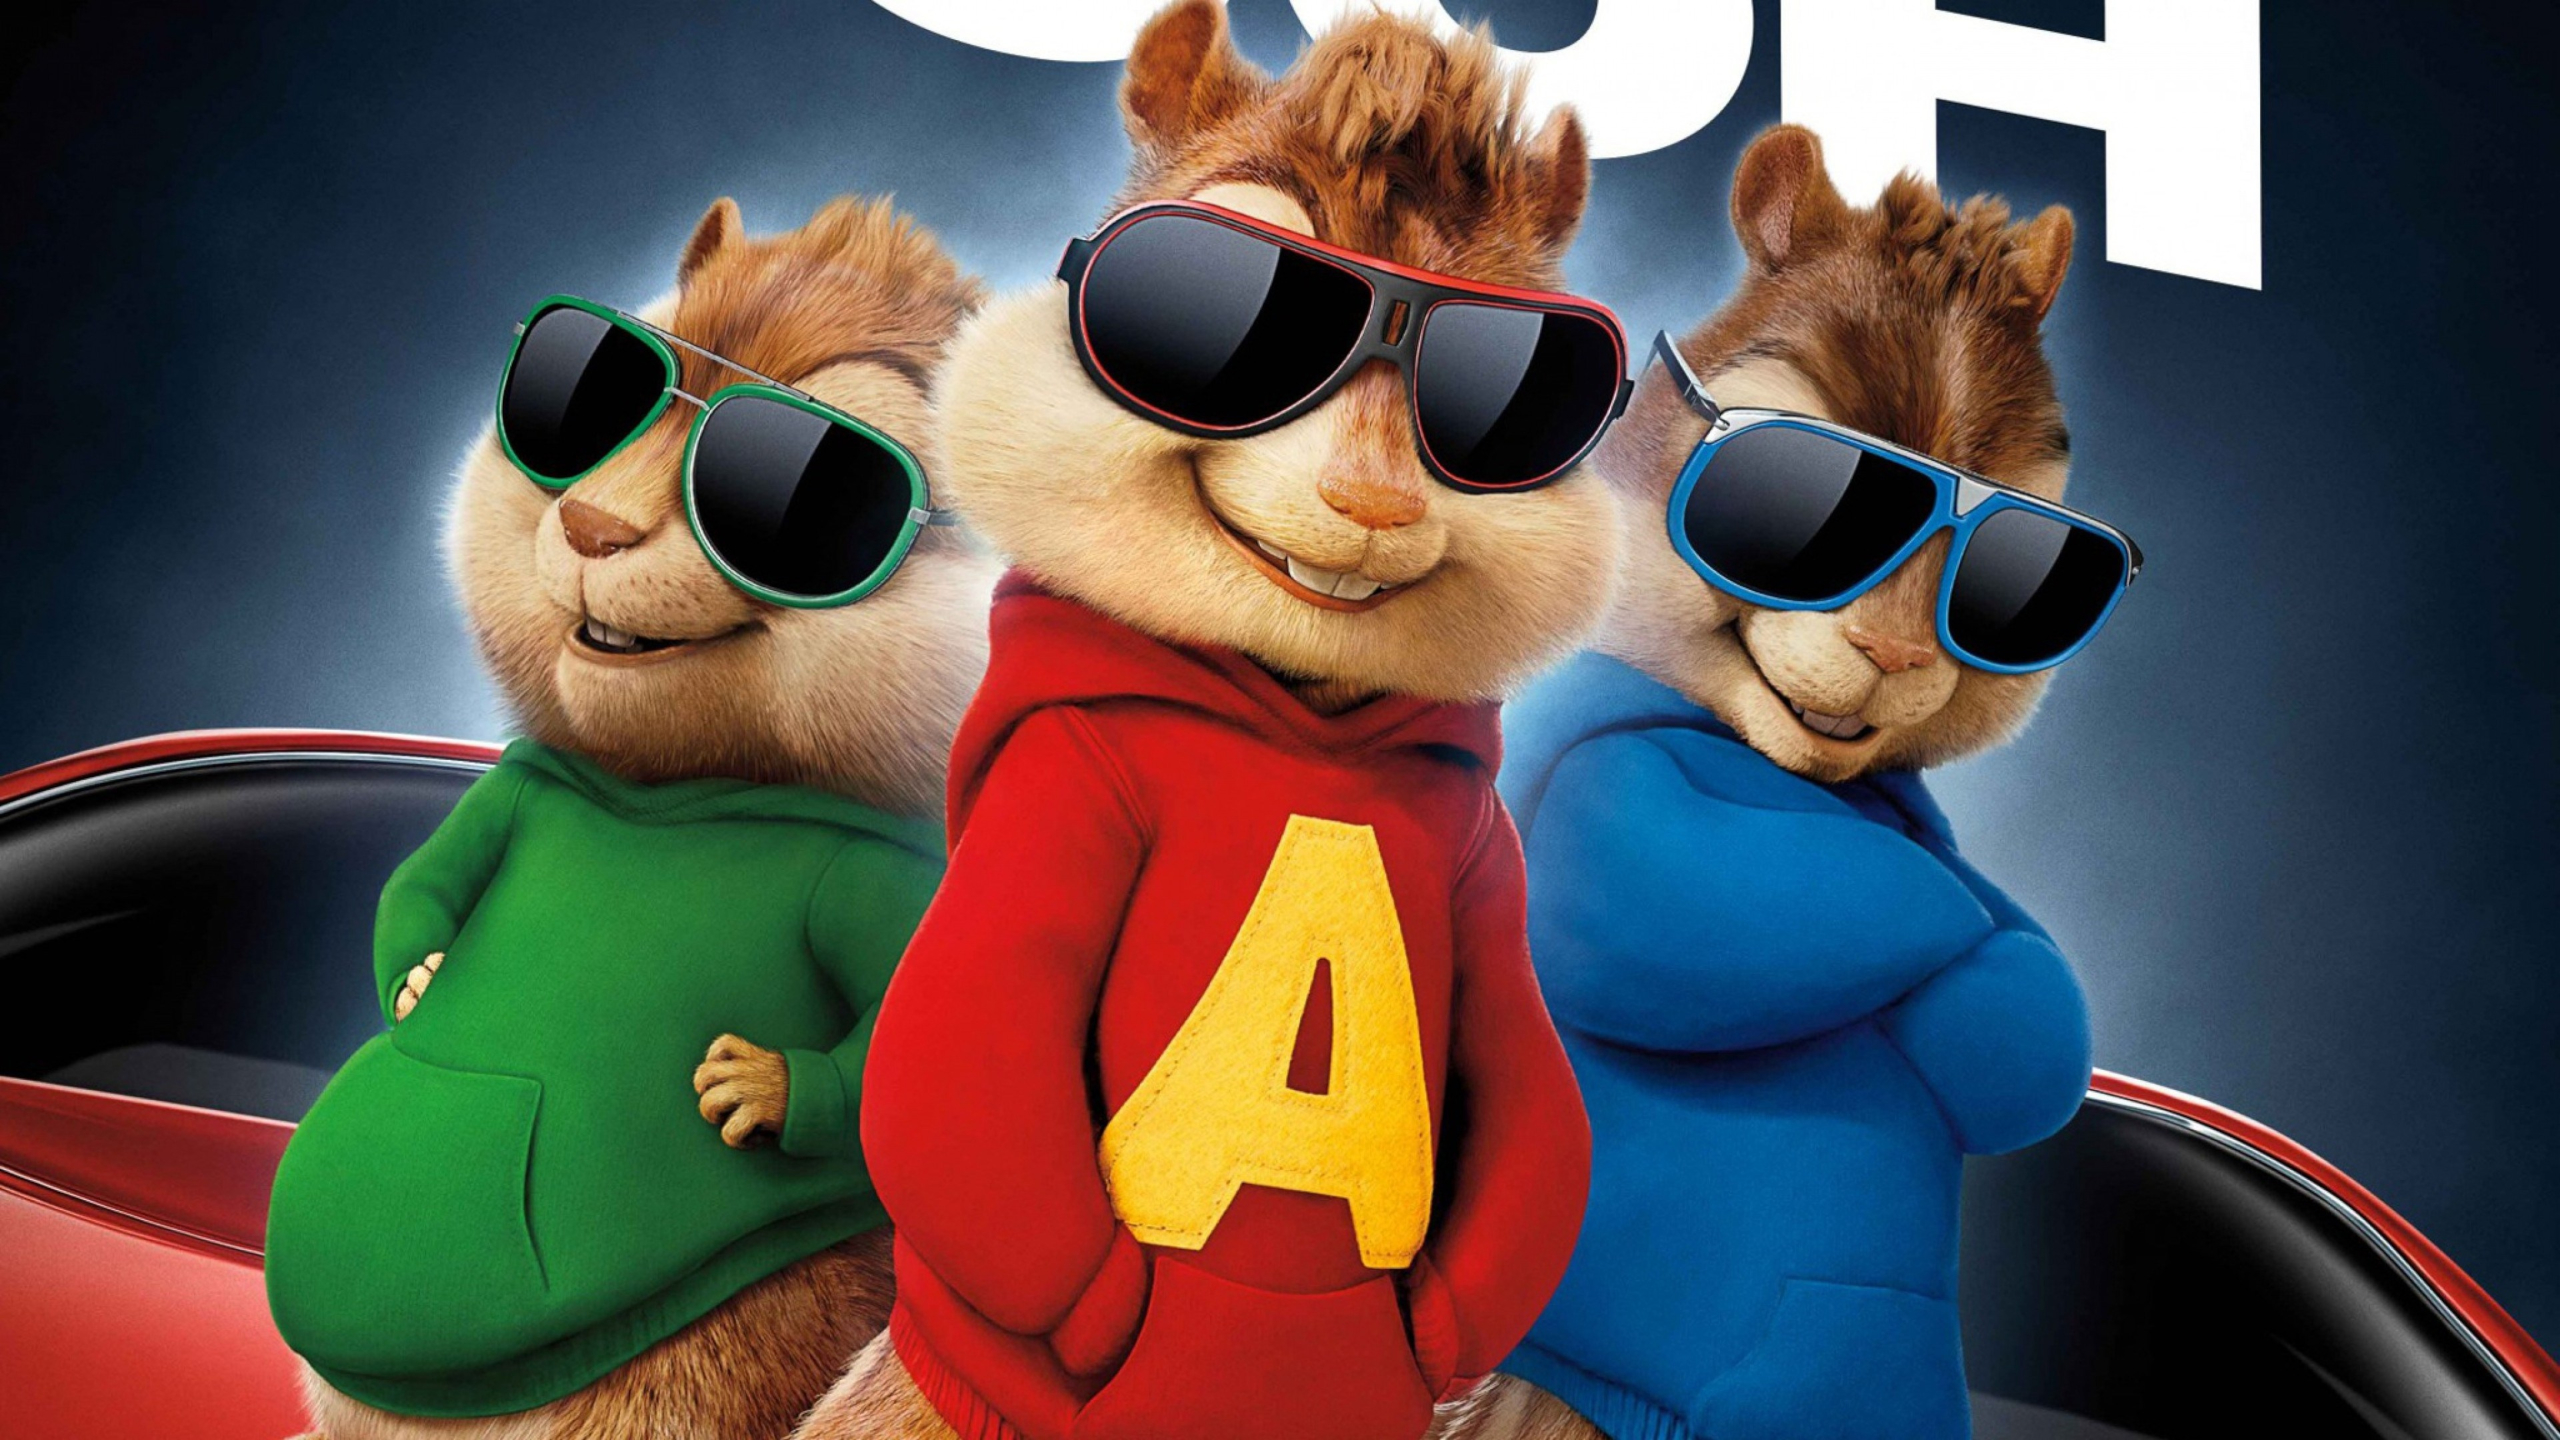 Movie Alvin and the Chipmunks: The Road Chip HD Wallpaper | Background Image